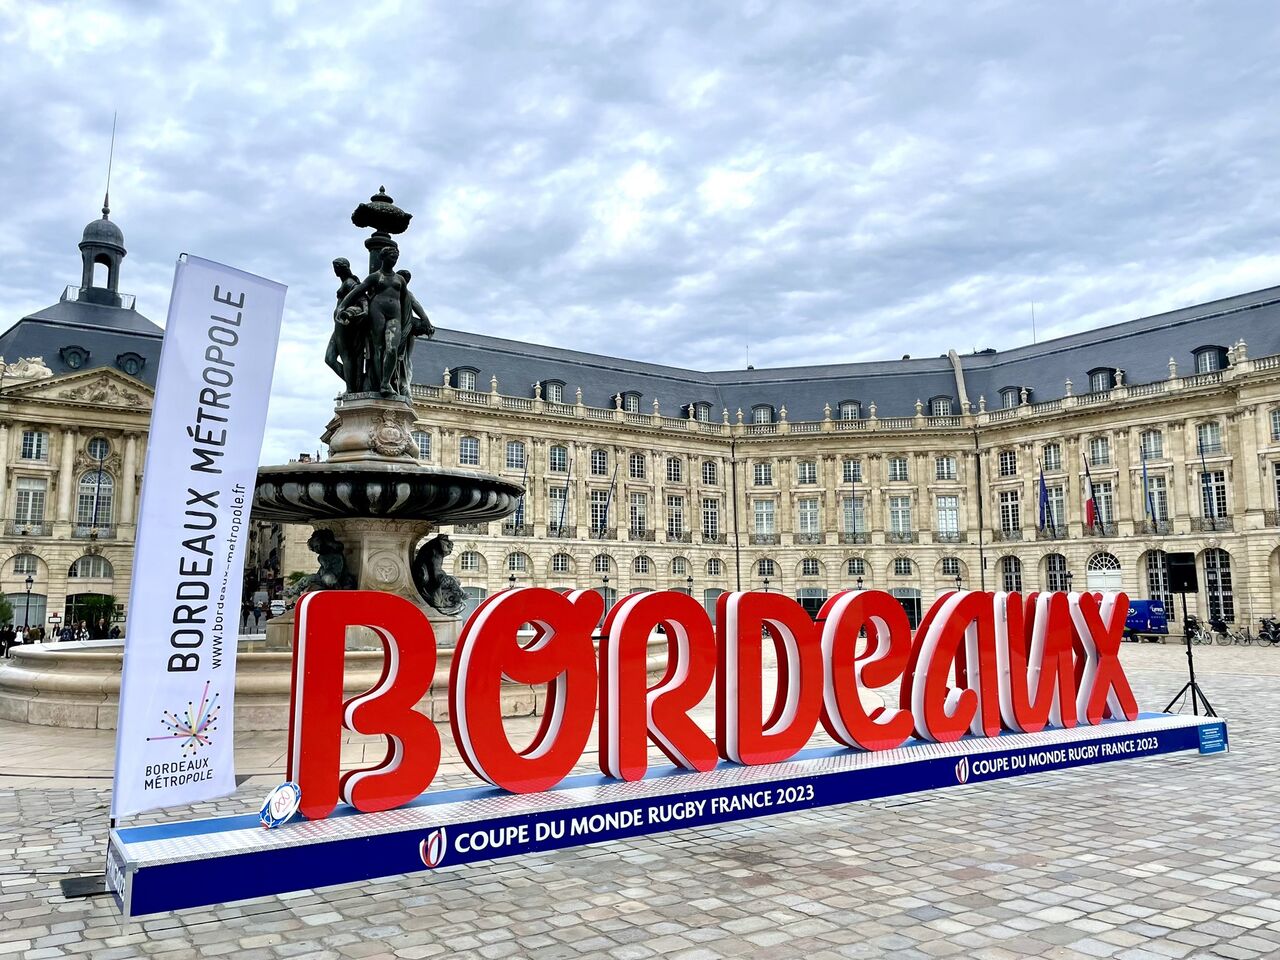 Inspirebox_container itinerant_coupe du monde rugby_bordeaux